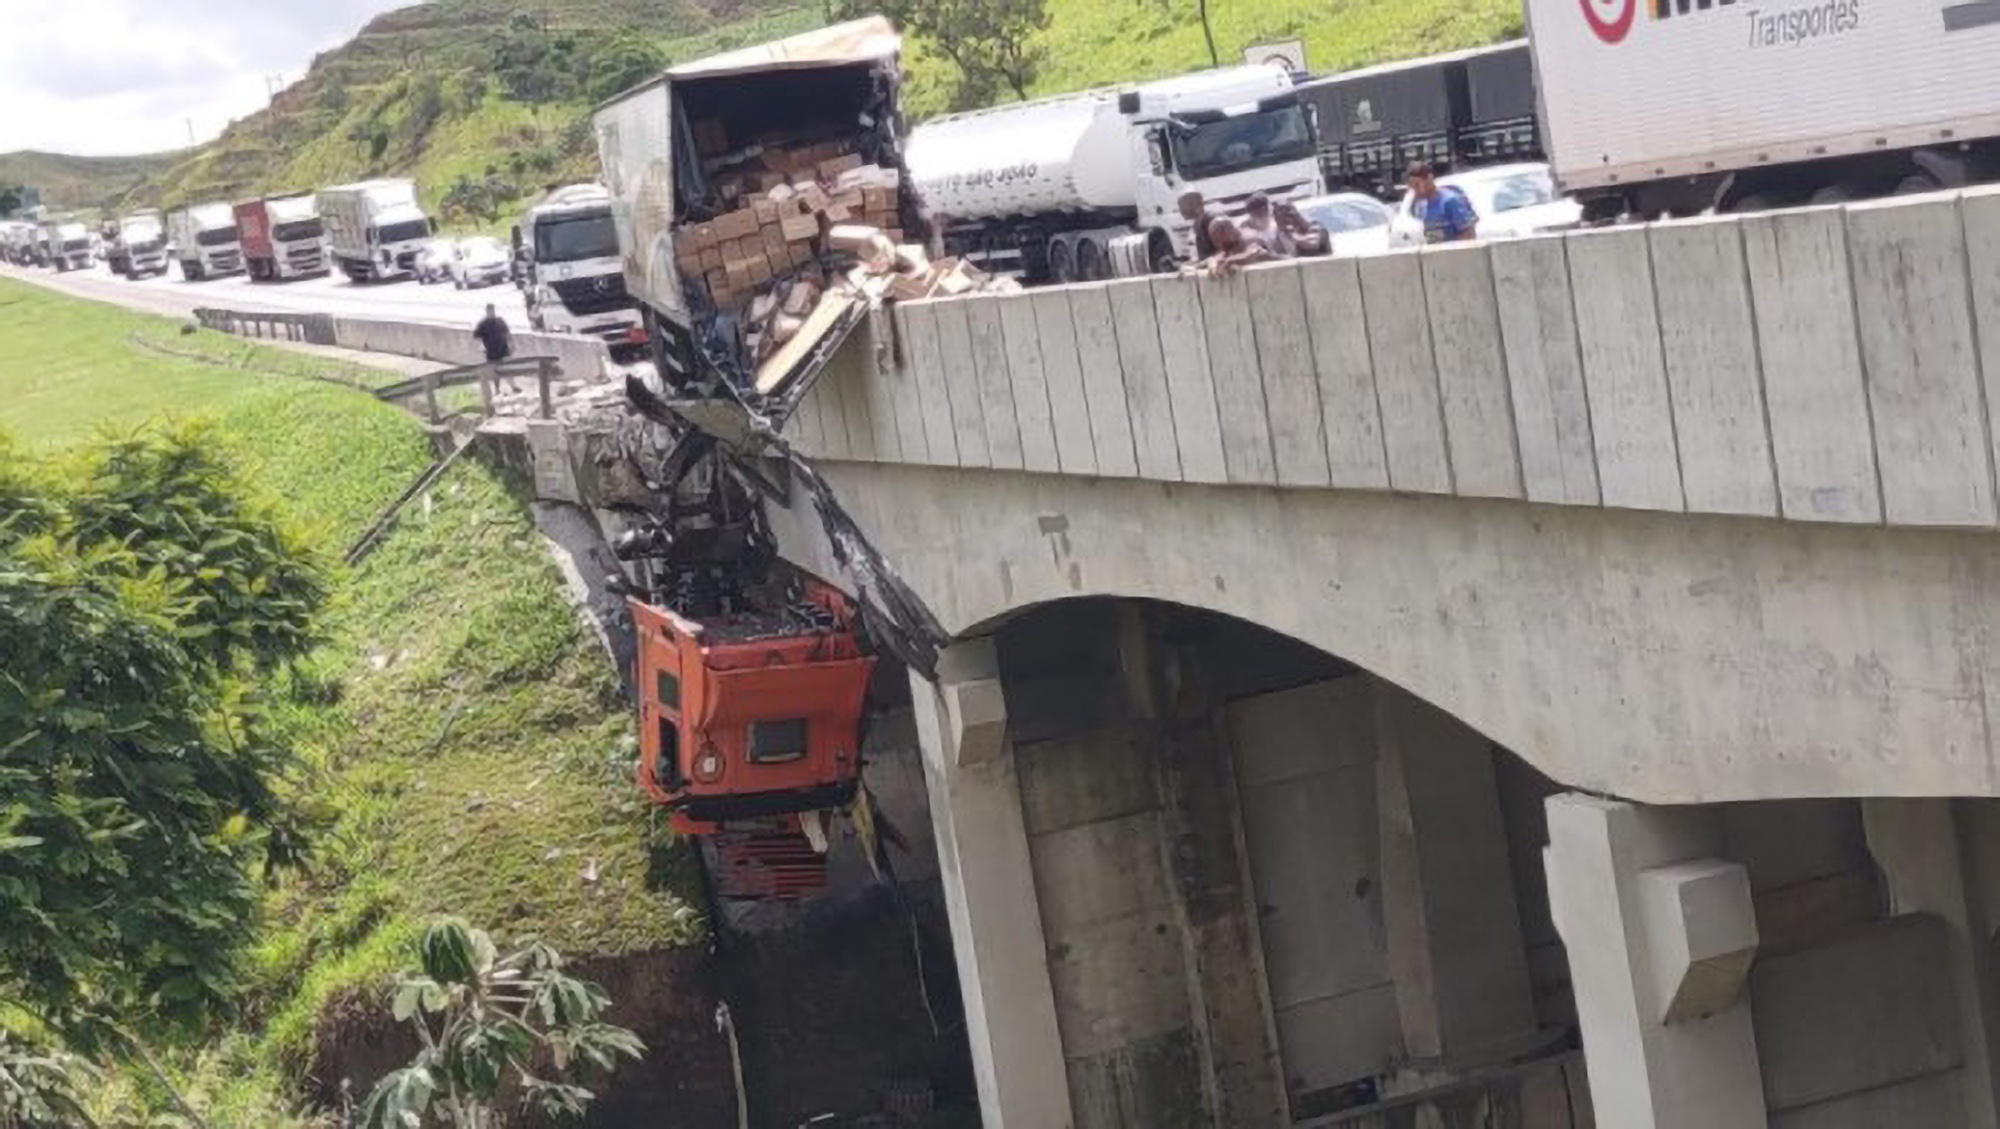 Read more about the article Lorry Driver Dangles 26 Feet From Ground In Cab After Crashing Through Barrier During Pileup